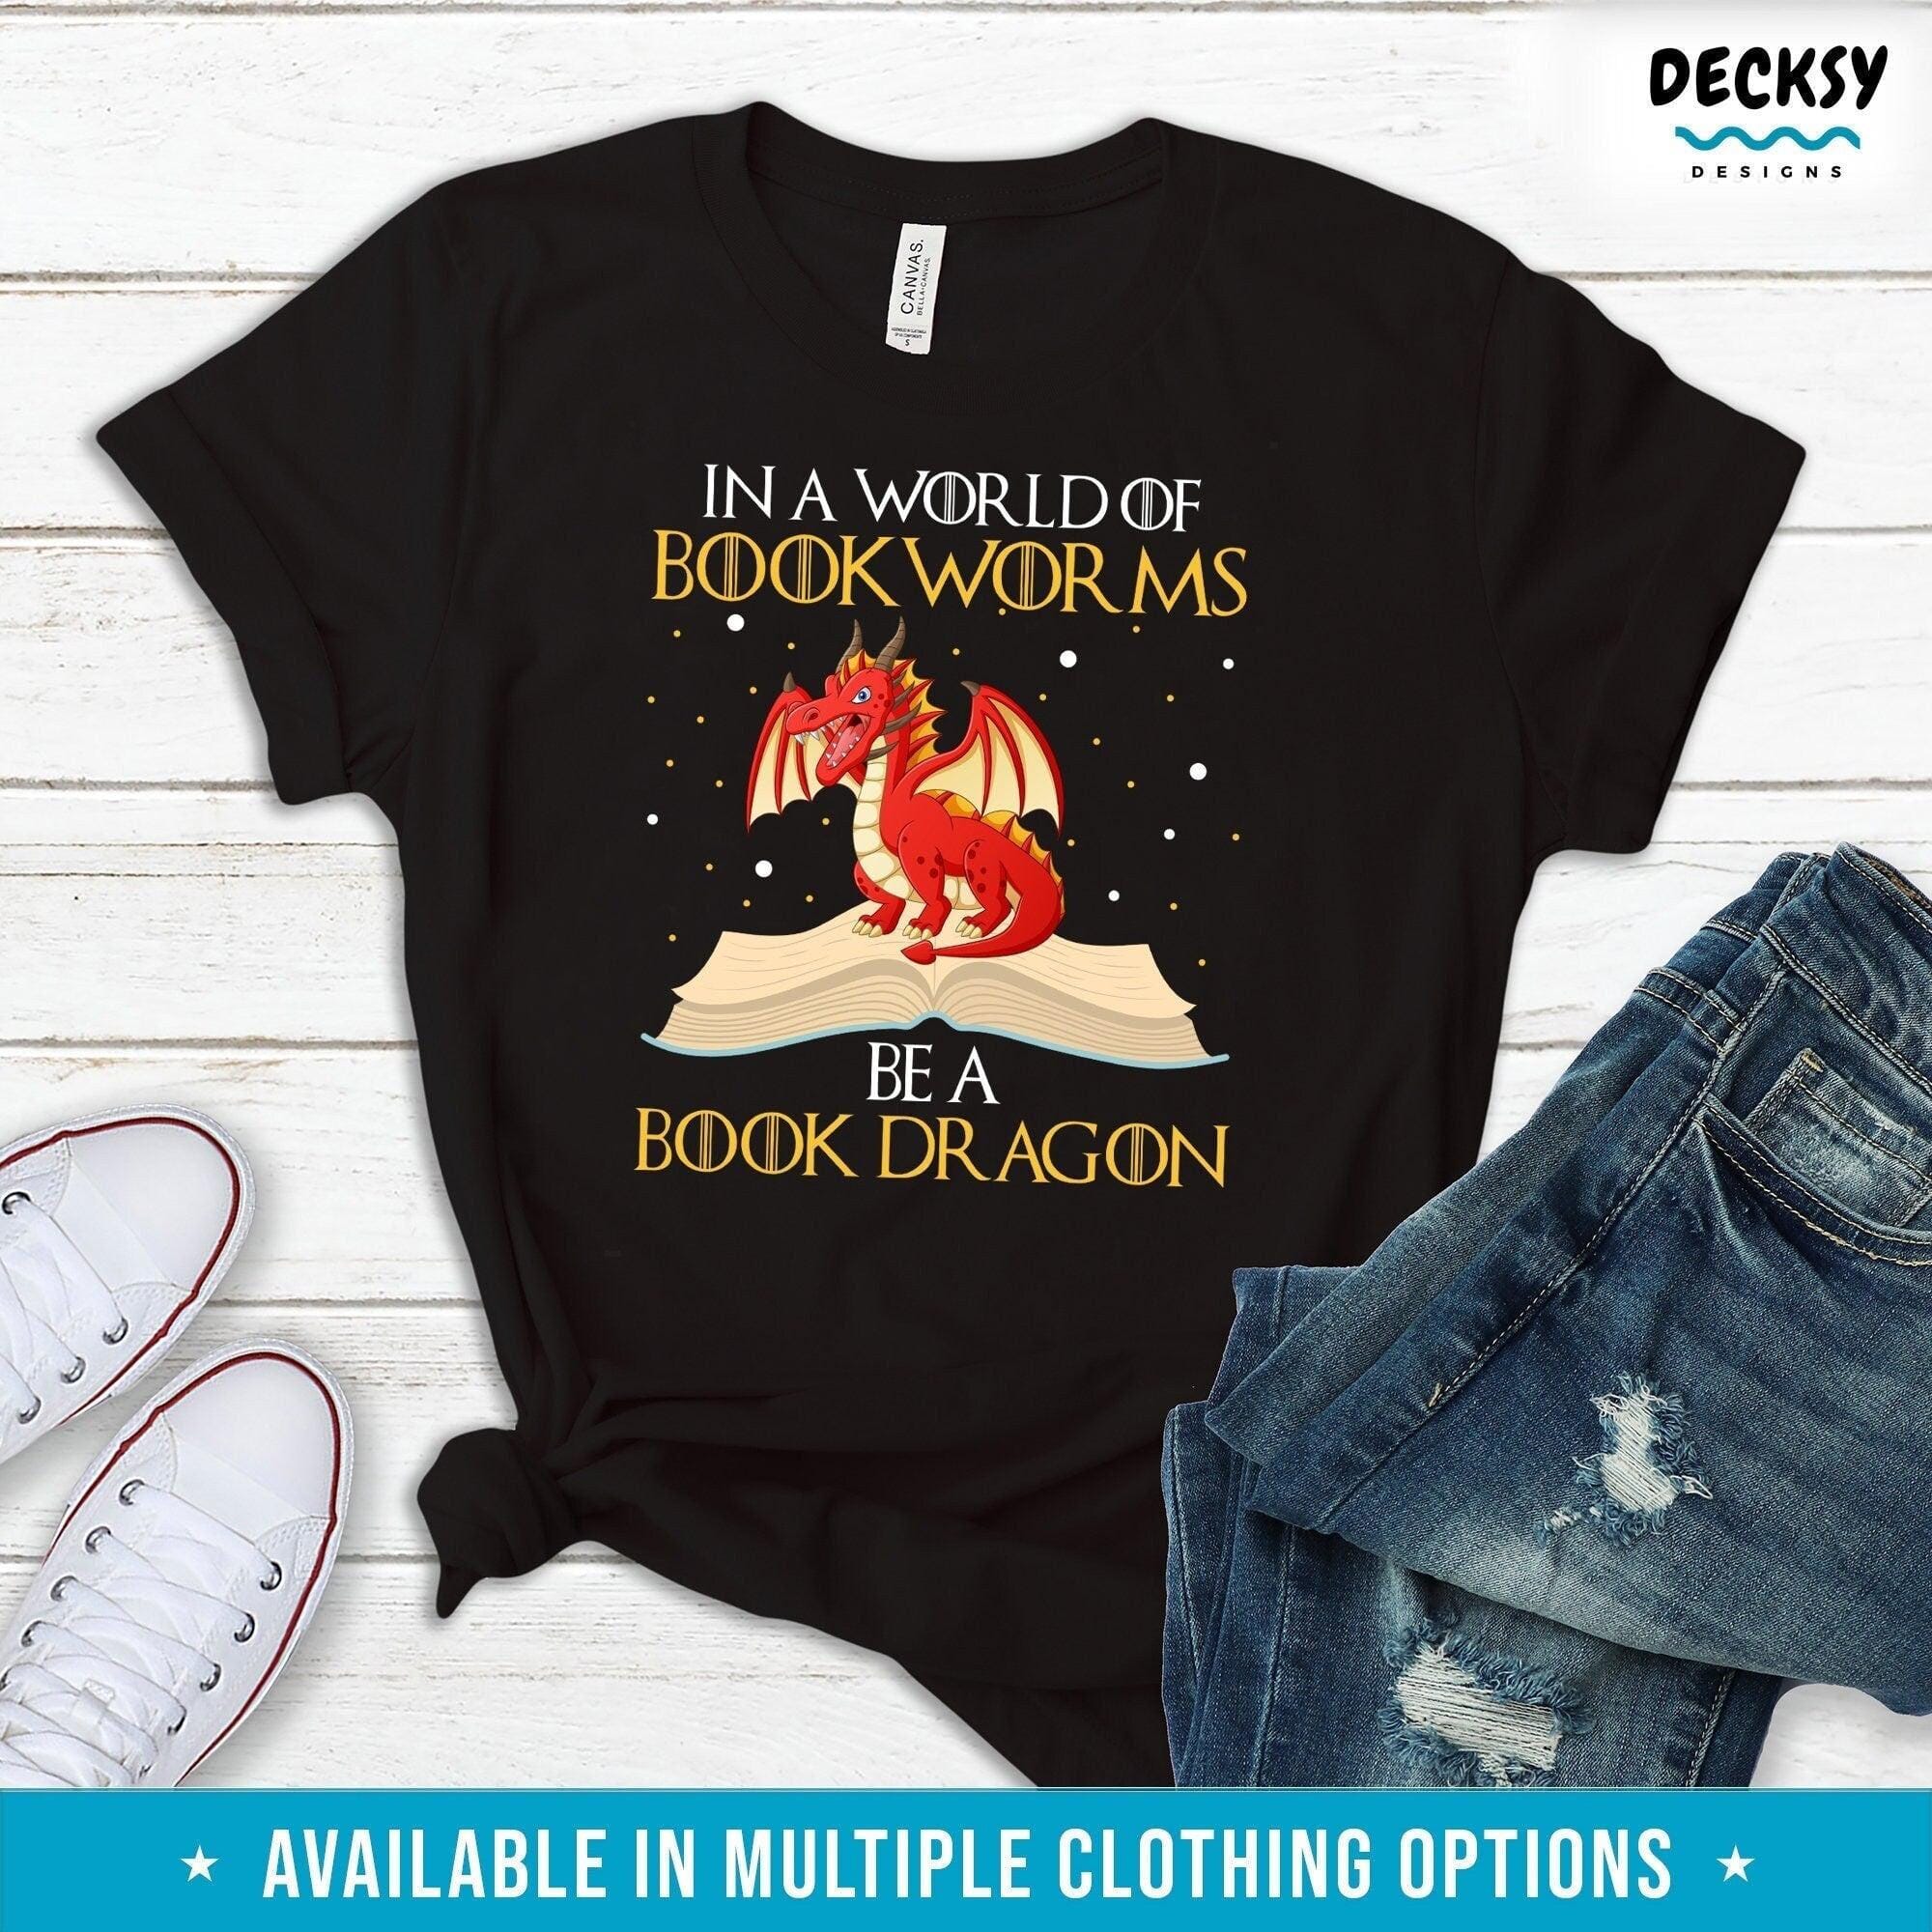 Book Lover Shirt, Book Worm Gift-Clothing:Gender-Neutral Adult Clothing:Tops & Tees:T-shirts:Graphic Tees-DecksyDesigns